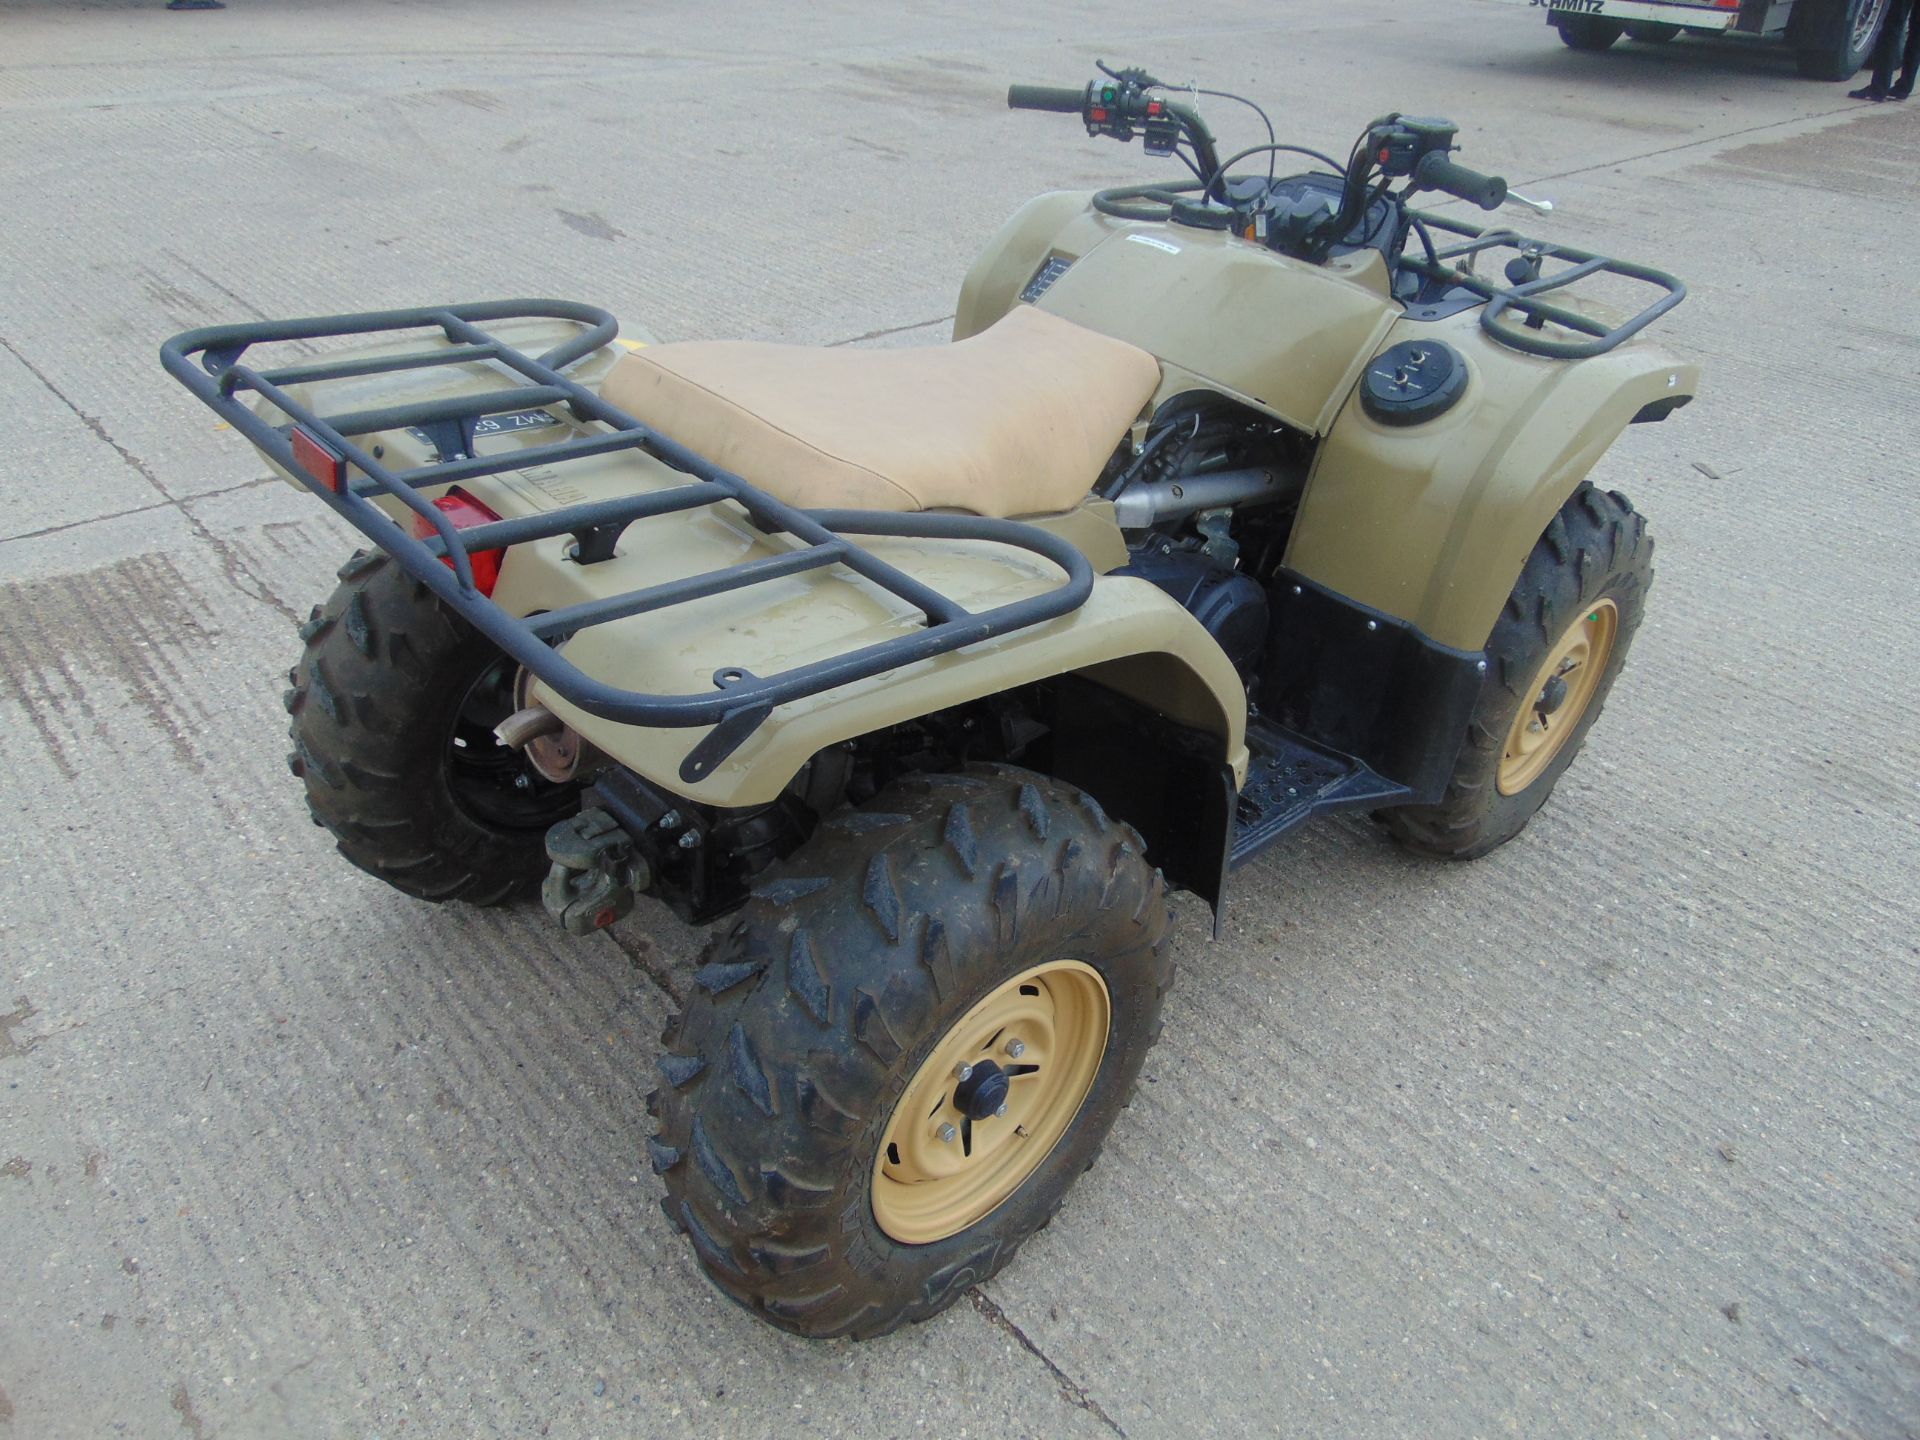 Military Specification Yamaha Grizzly 450 4 x 4 ATV Quad Bike - Image 7 of 19